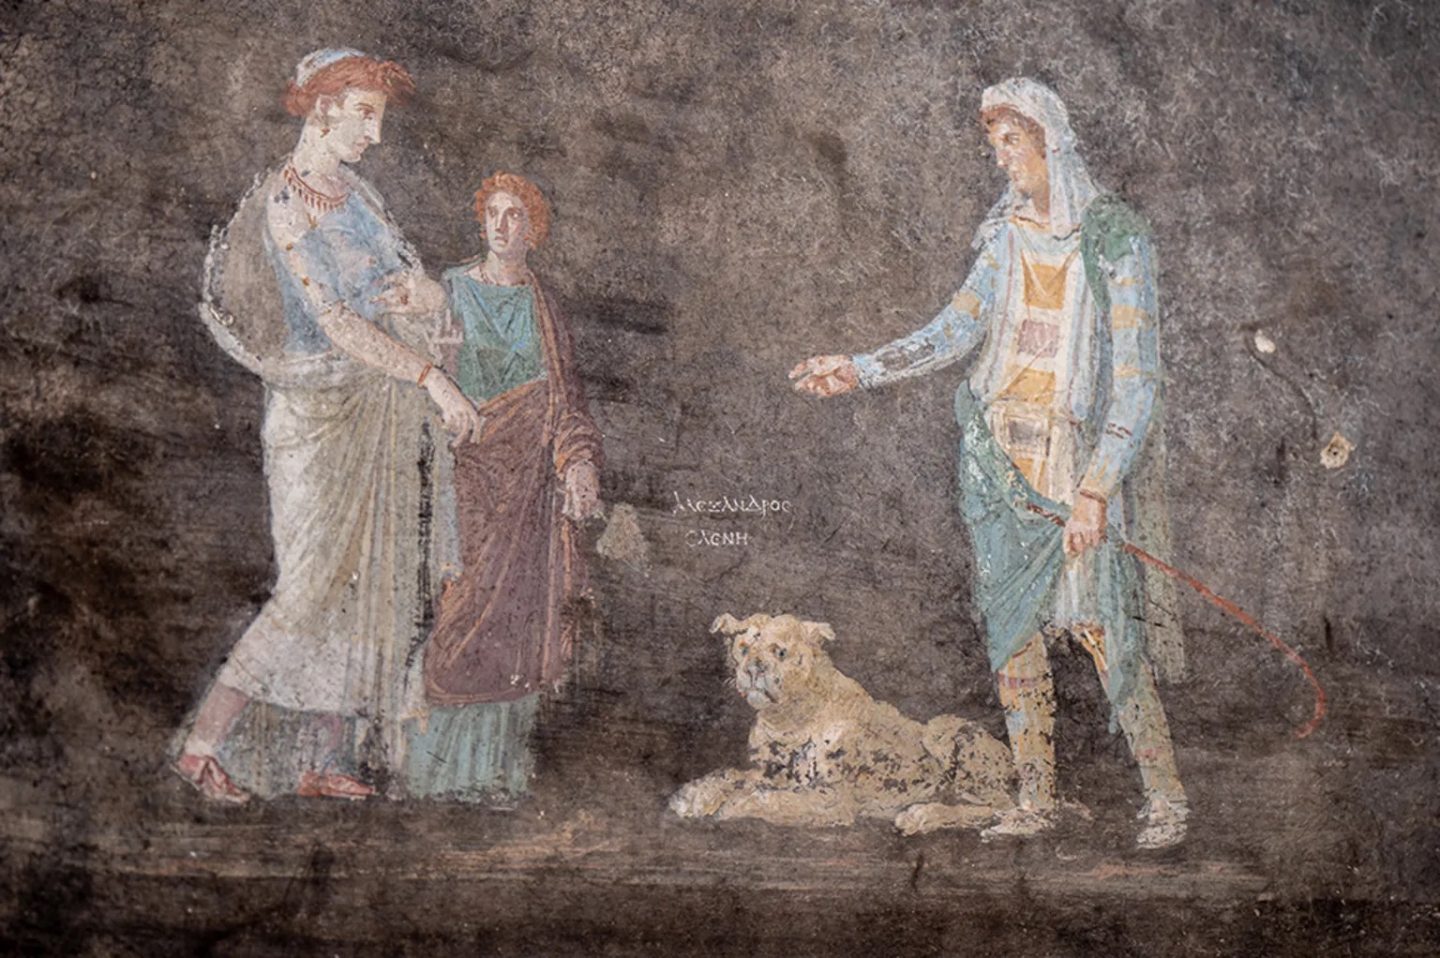 Breathtaking new paintings found in Pompeii